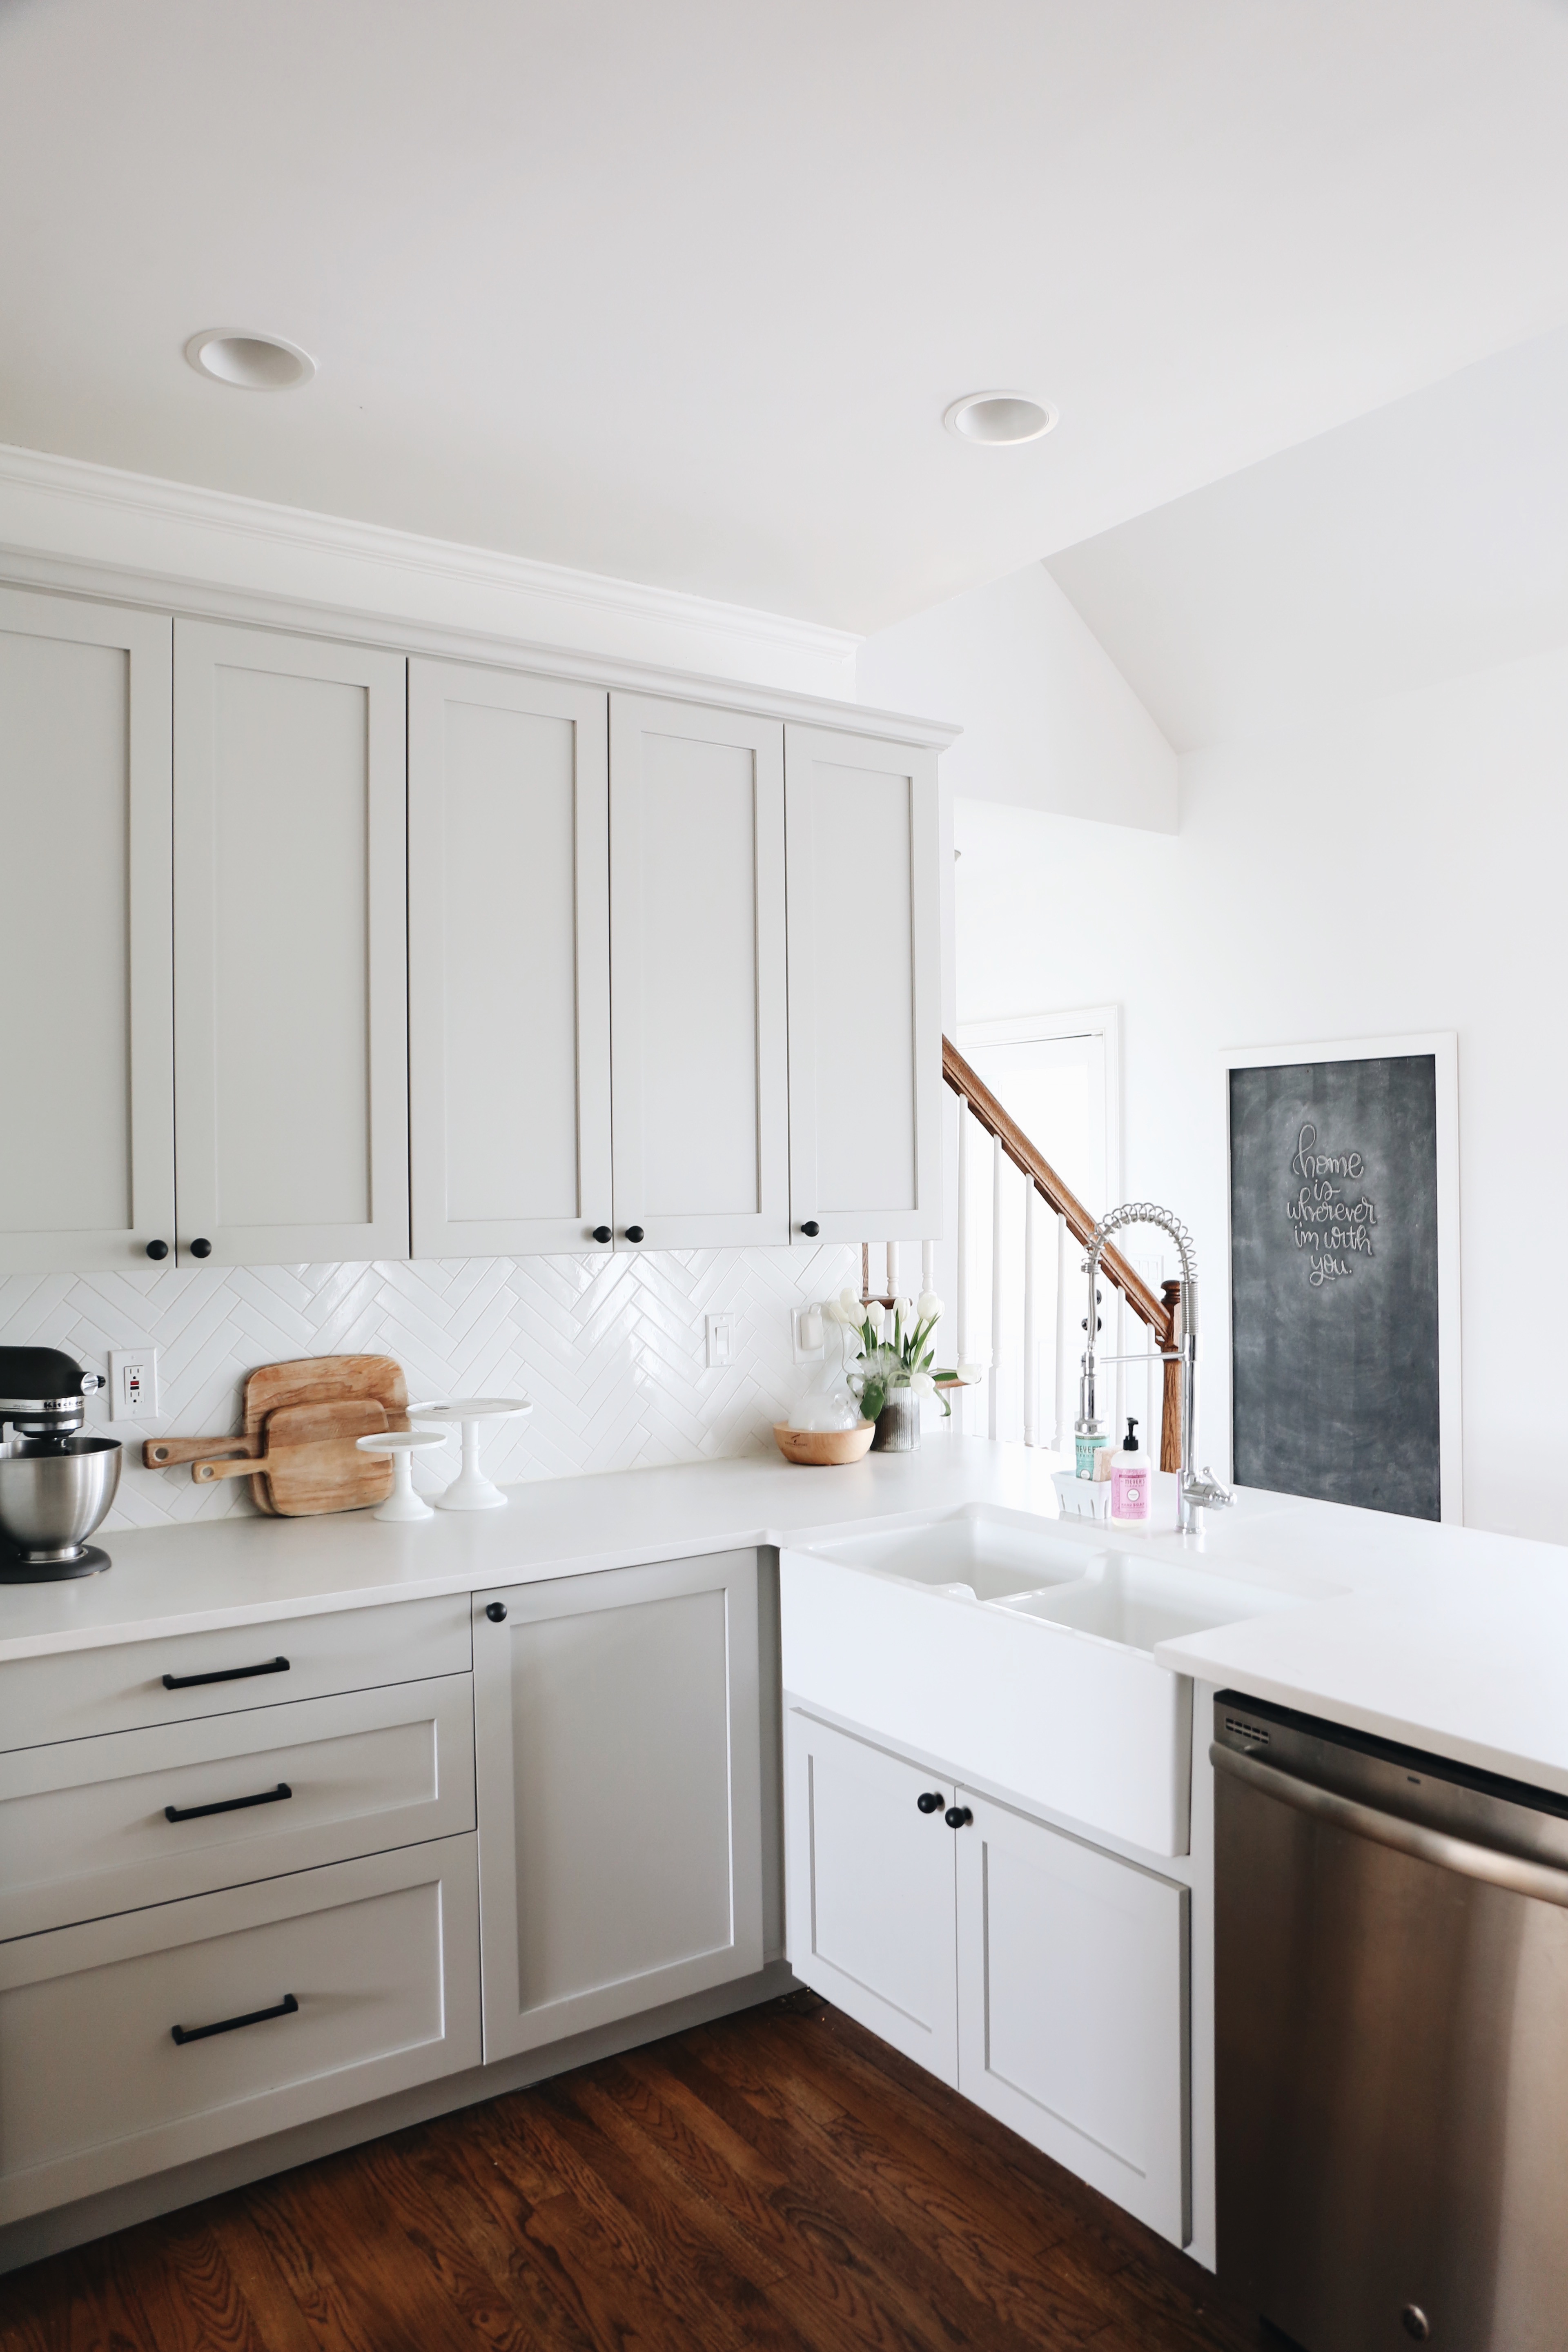 Our Kitchen Renovation Details – Garvin And Co